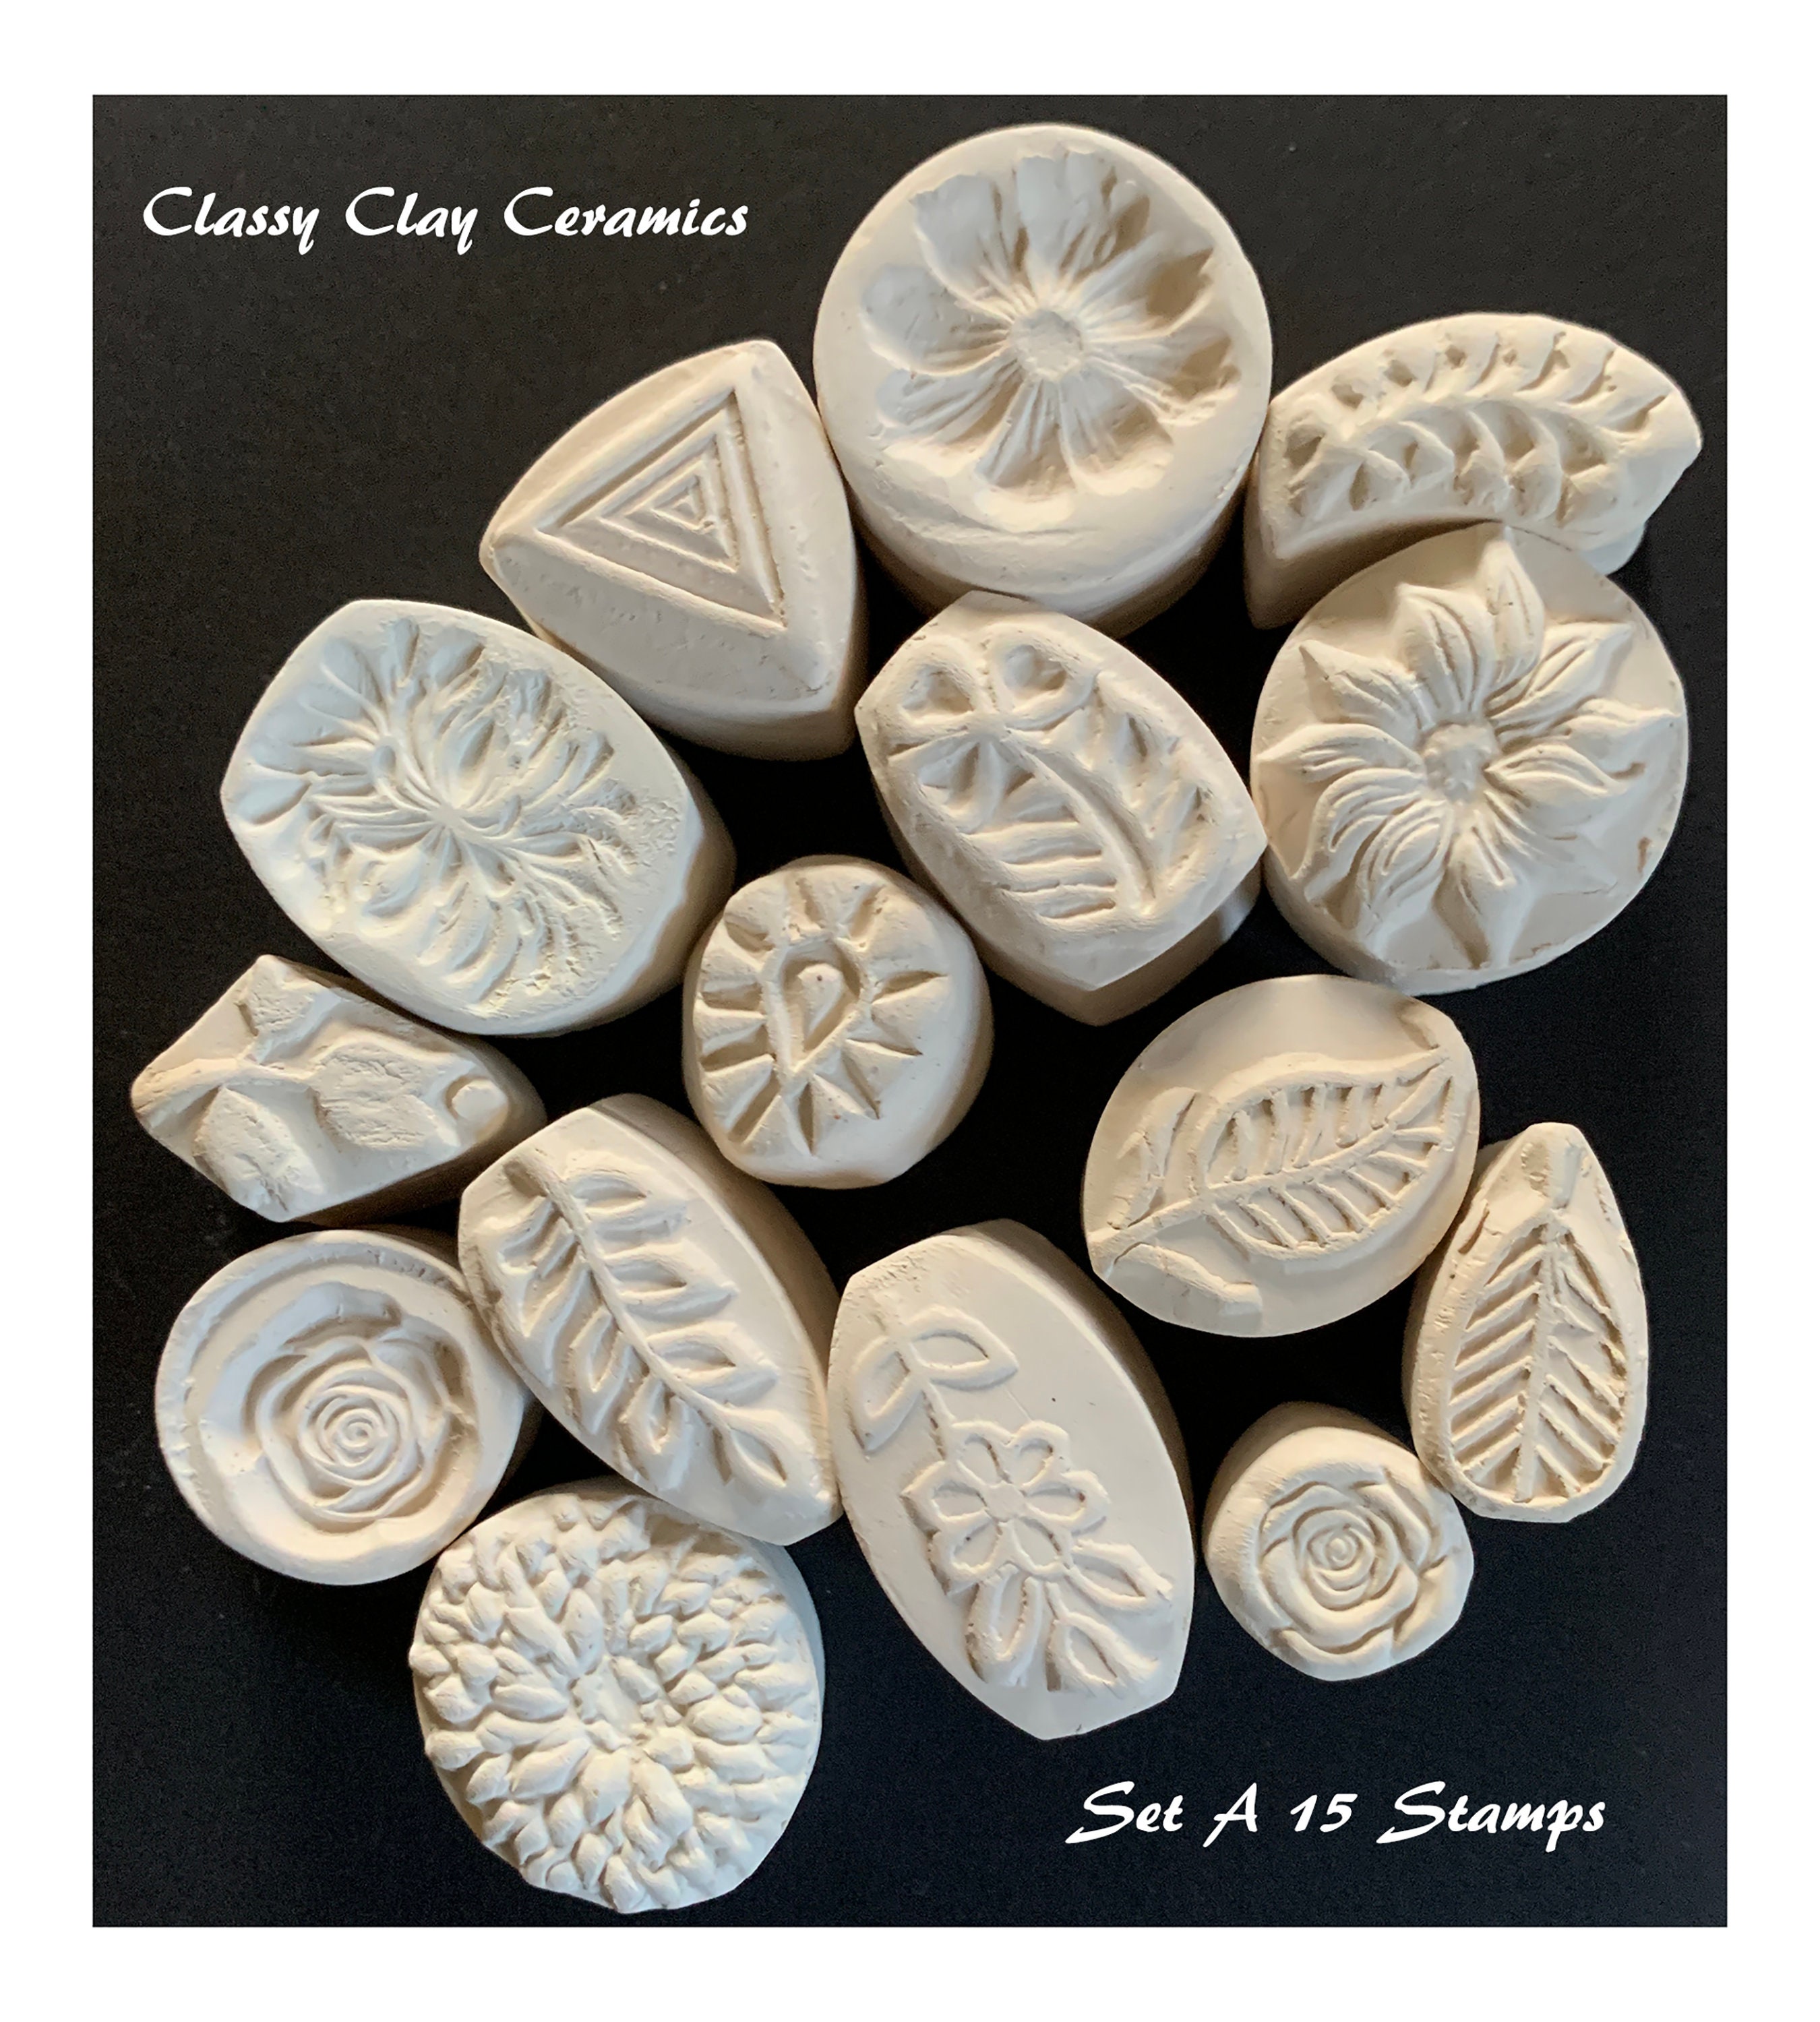 Set of Ceramic Stamps / Clay Stamps / Tools for Ceramics / Pottery  /Handmade Bisque Clay Stamps / Ha - #Bis…